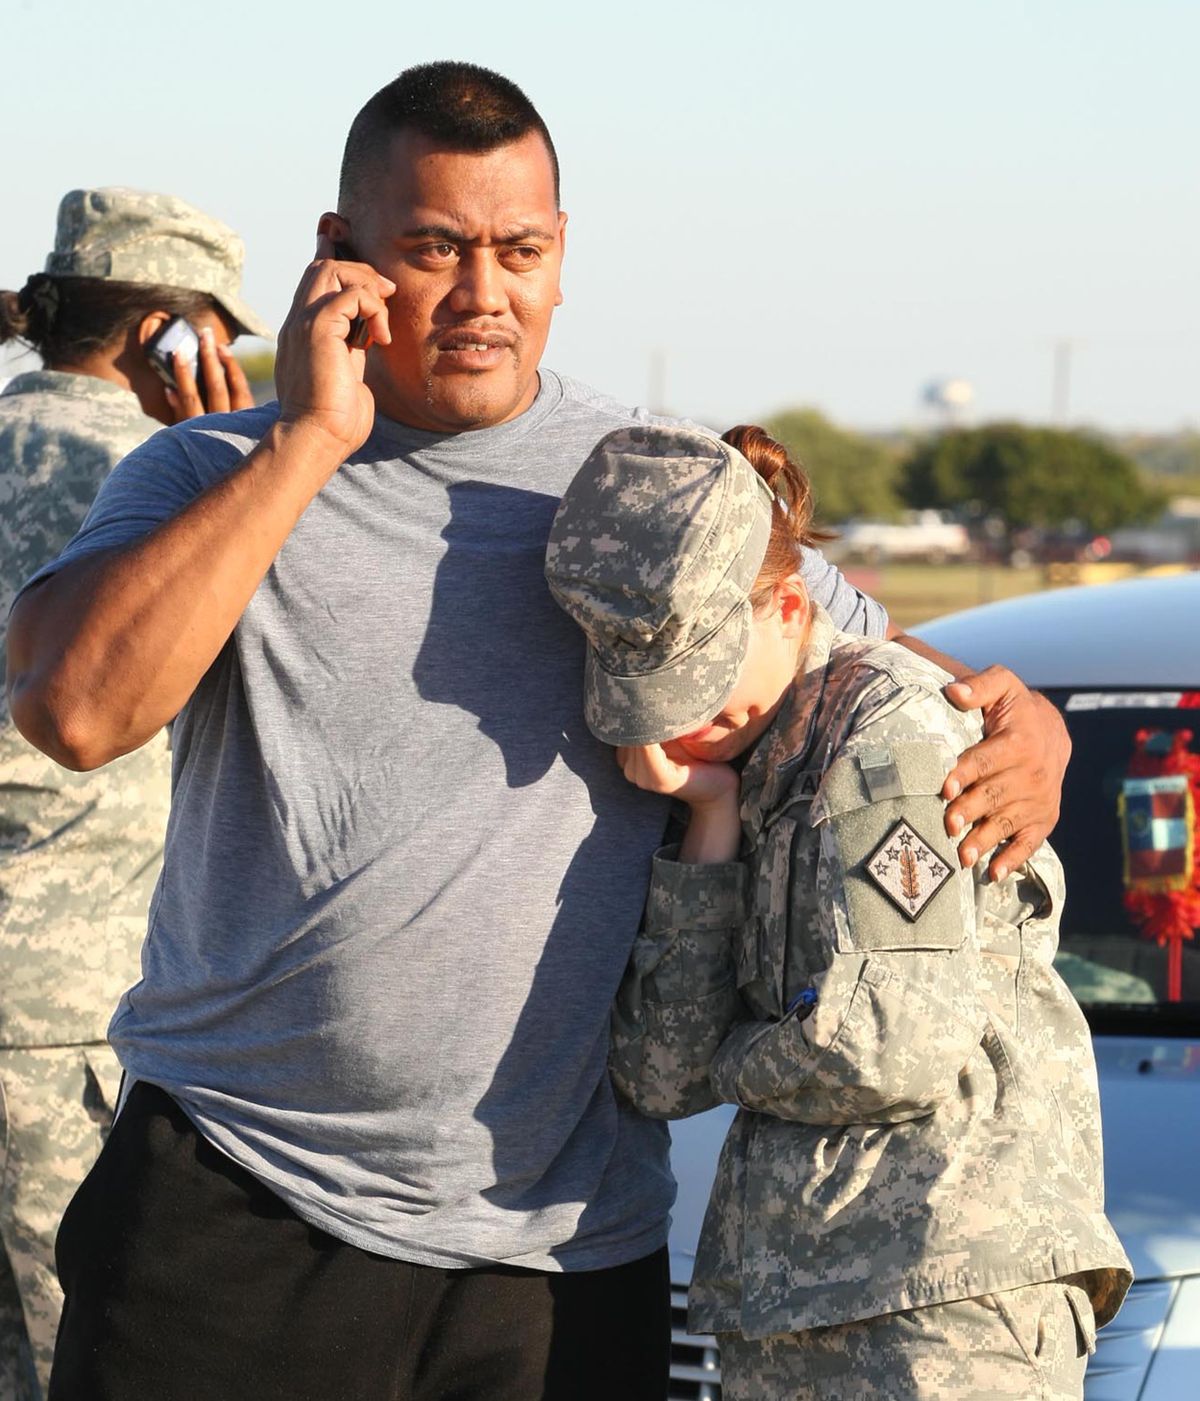 Staff Sgt. Fanuaee Fea, 32, comforts Savannah Green, 23, after Thursday’s shooting at Fort Hood, Texas.  (Associated Press / The Spokesman-Review)